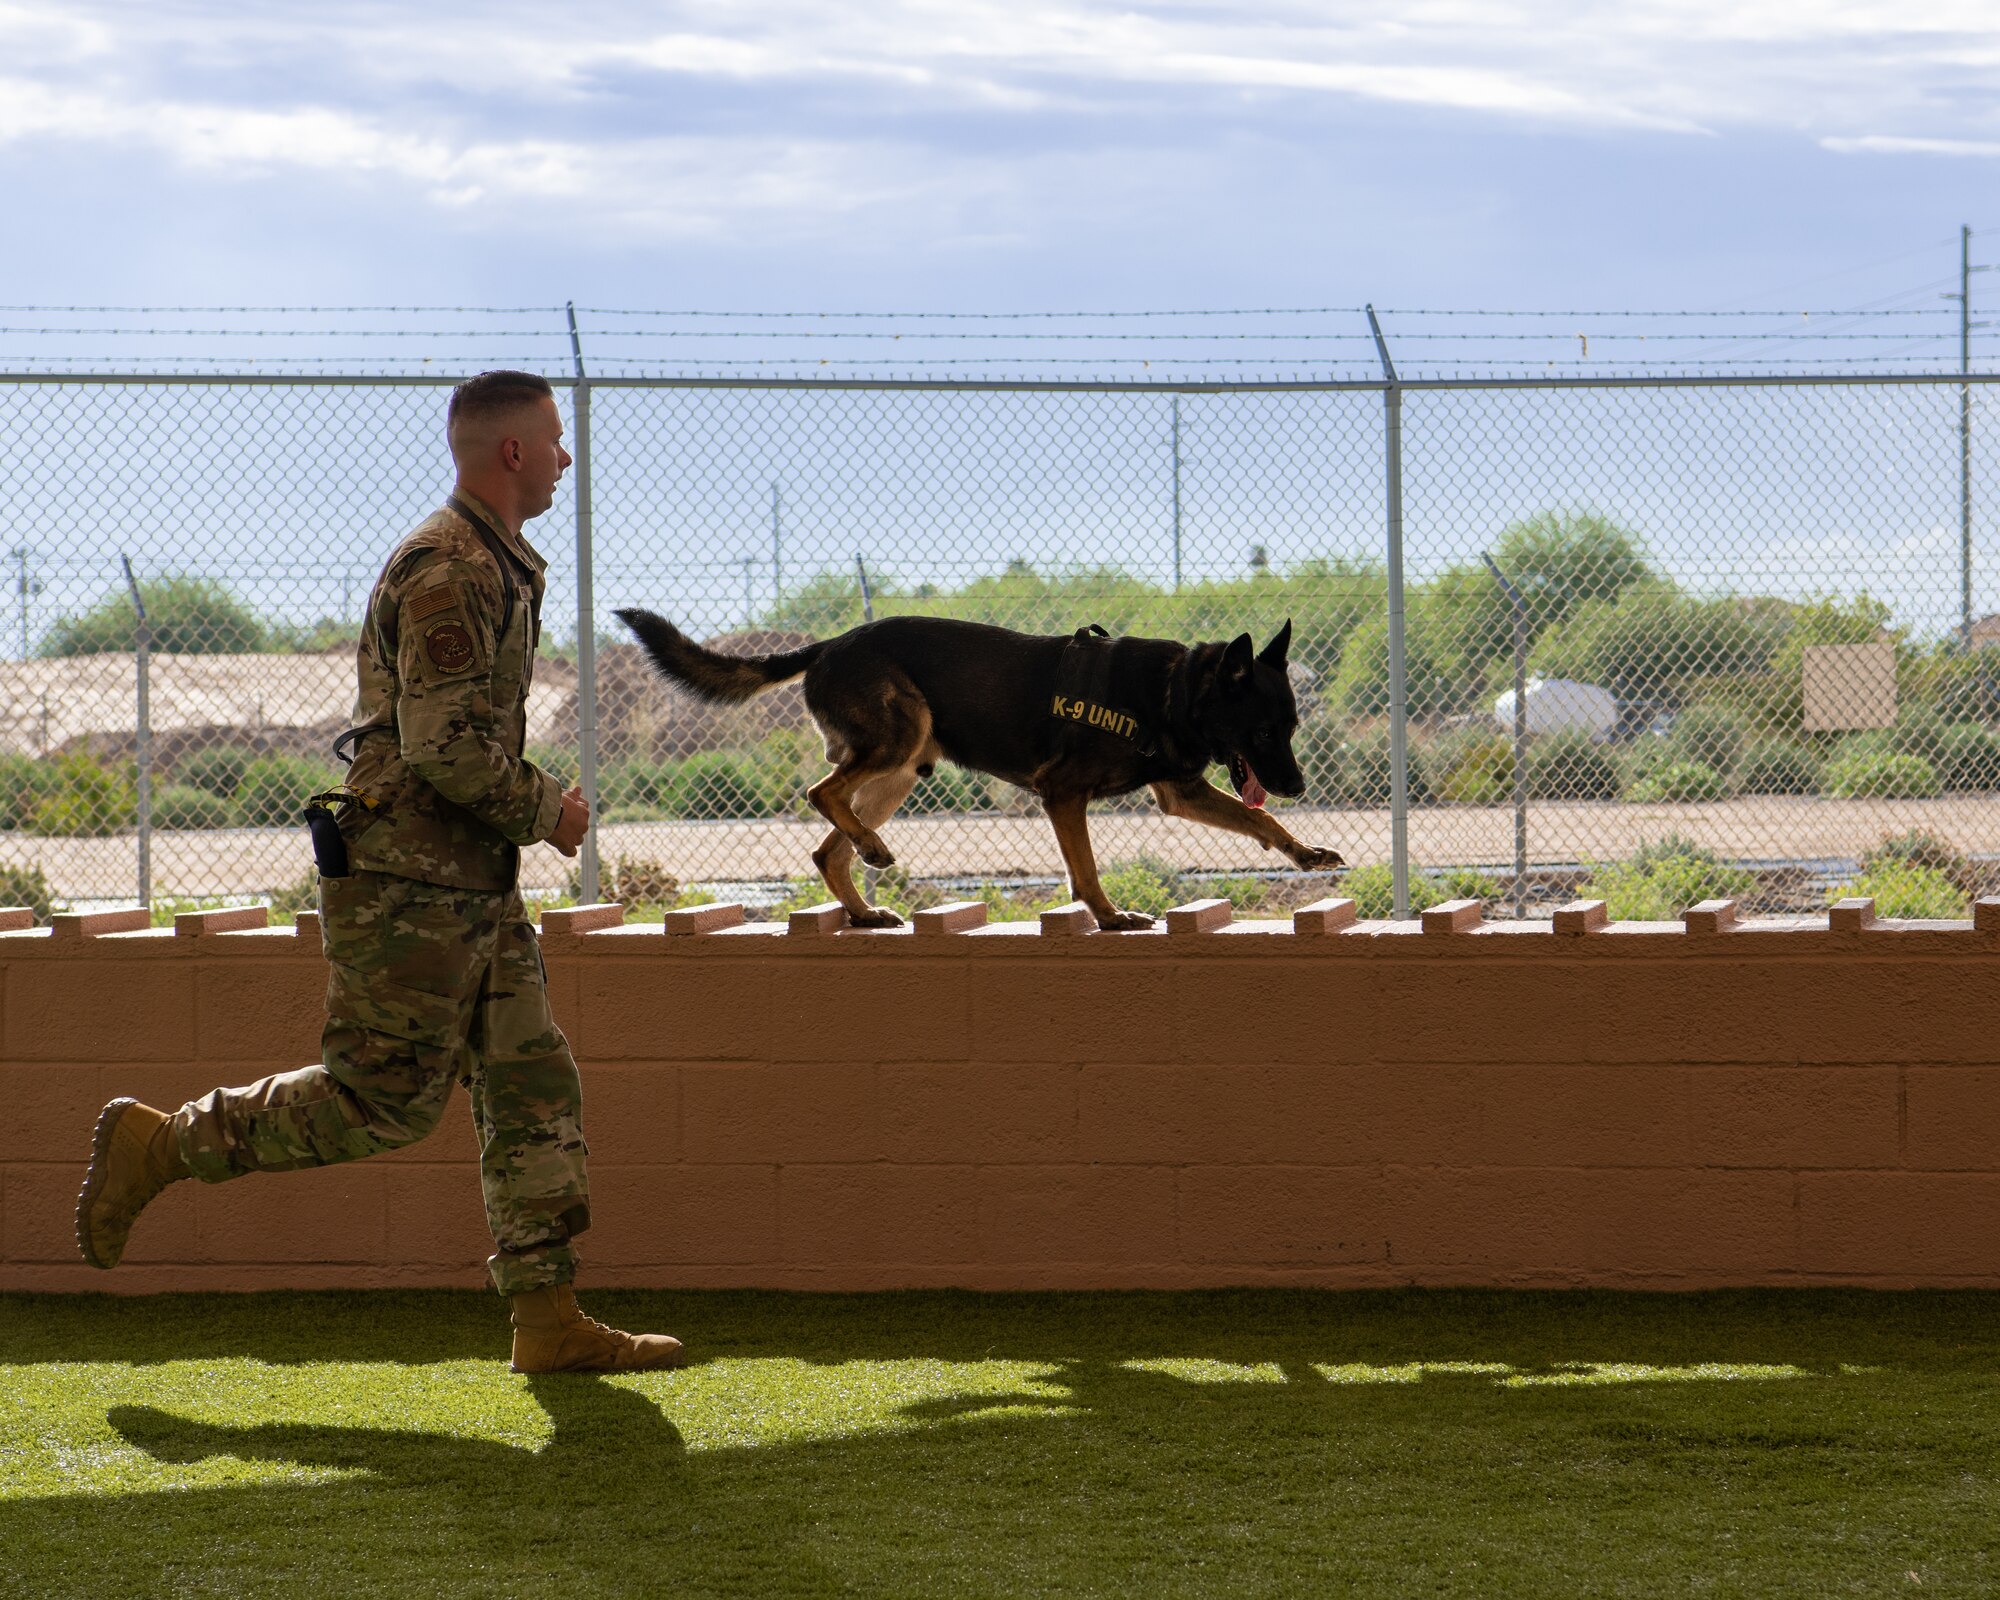 Staff. Sgt. Will Thompson, 56th Security Forces Squadron military working dog handler, runs through an obstacle course with Rango, a military working dog, July 31, 2019, at Luke Air Force Base, Ariz.